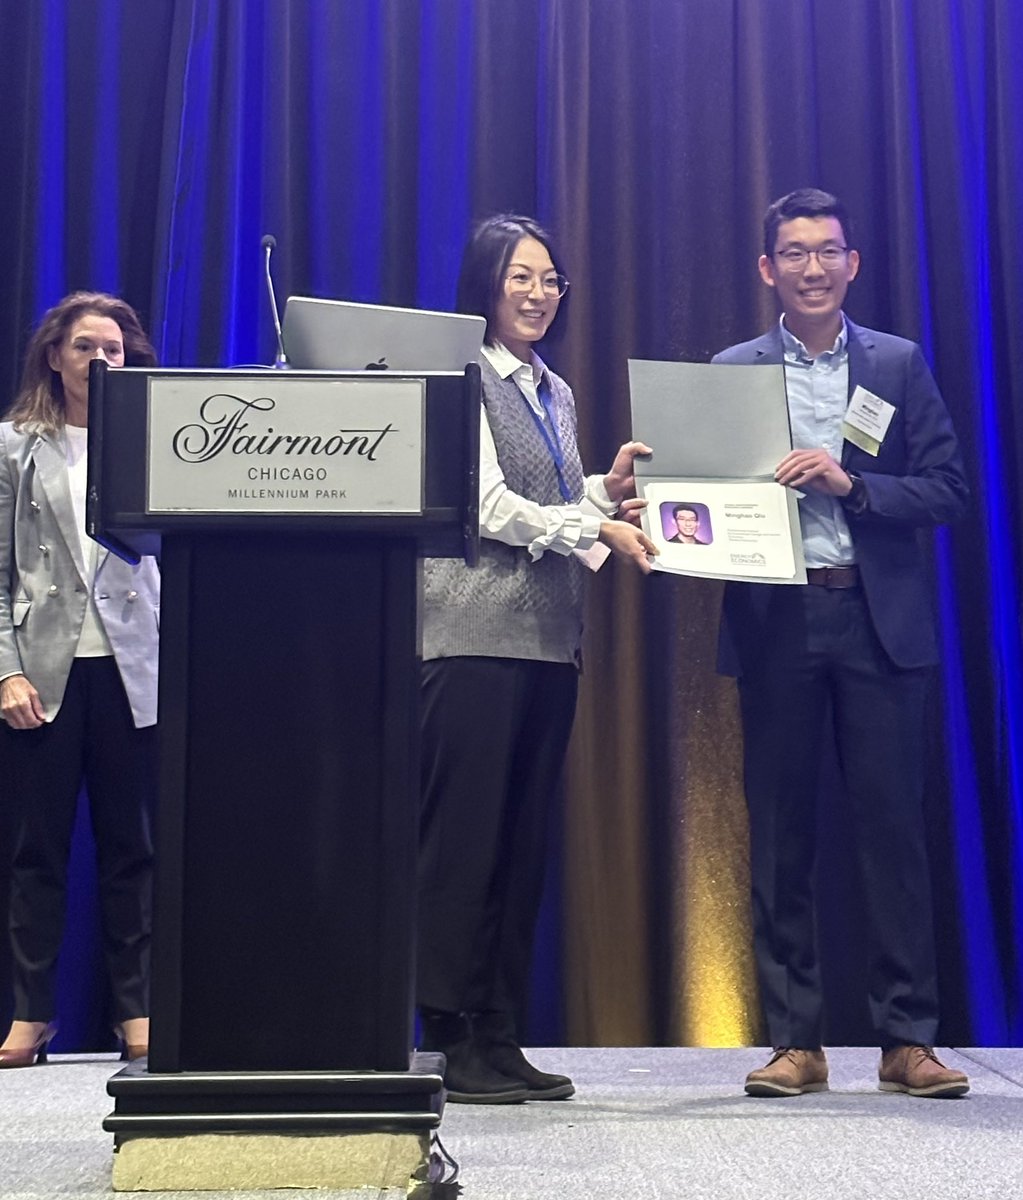 We are happy to announce that Minghao Qiu, postdoctoral scholar at @Stanford, was recognized at #usaee2023 as the winner of the Young Professional Best Research paper competition, led by Yuting Yang of @UNM, selected by judges @StefanAmbec, @AnnaE_Broughel, @SchTim1, Paige Weber.